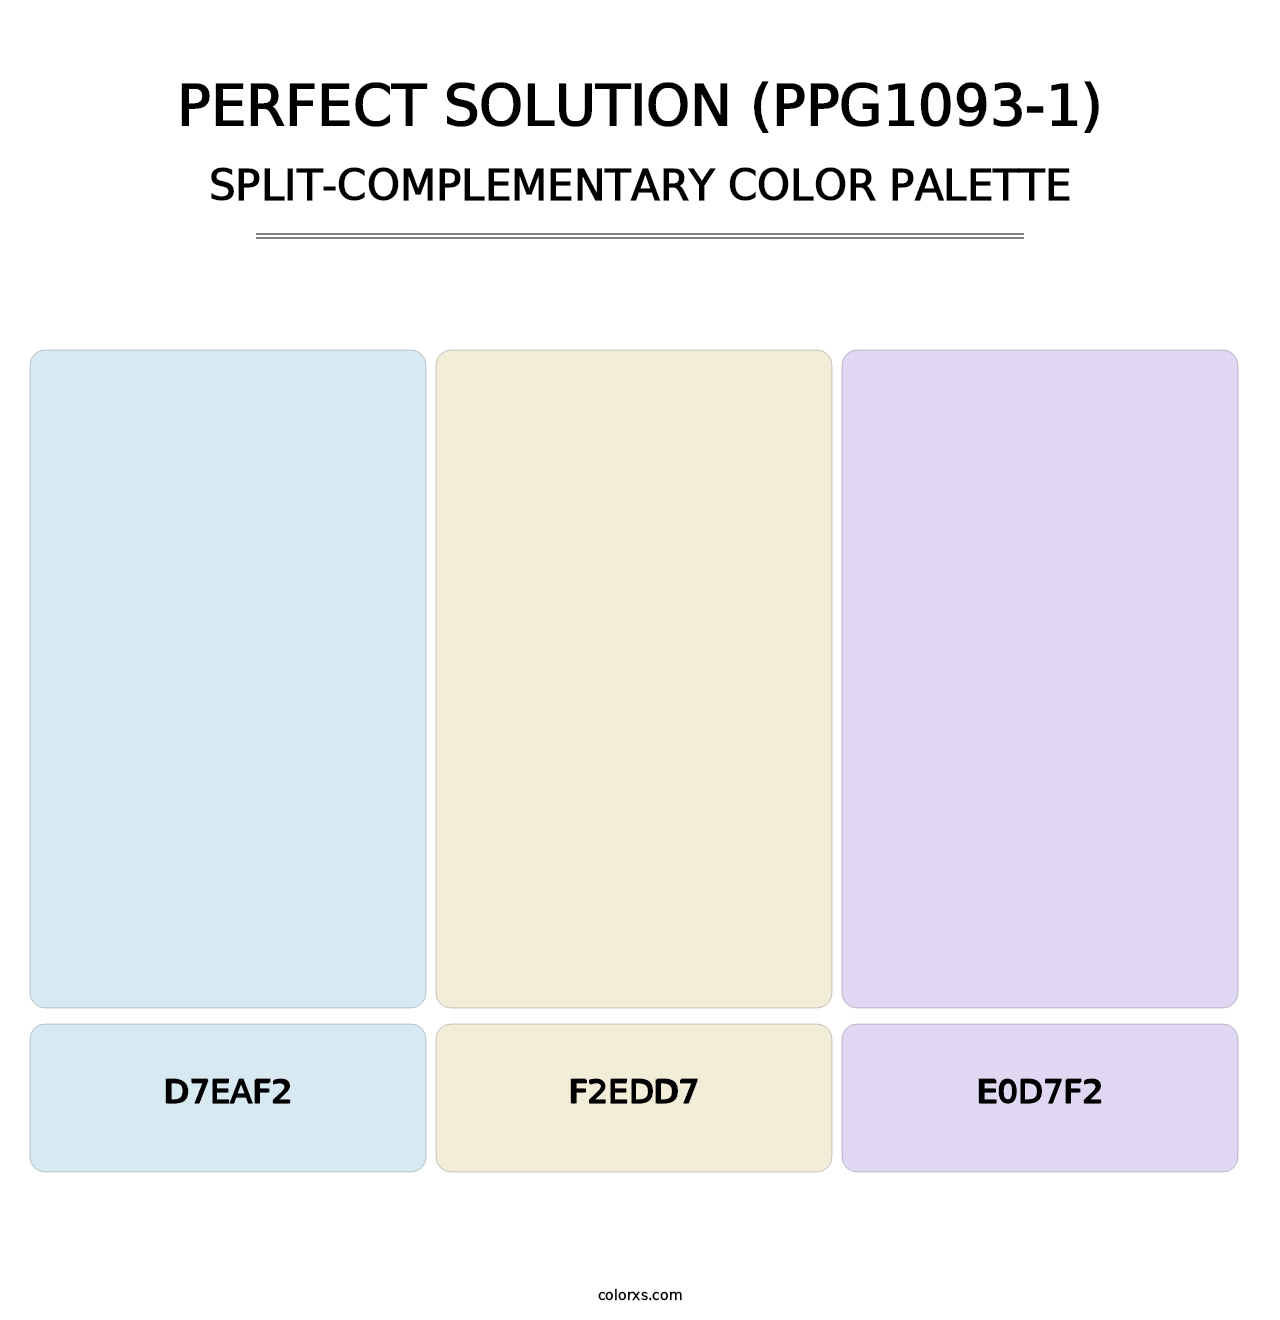 Perfect Solution (PPG1093-1) - Split-Complementary Color Palette